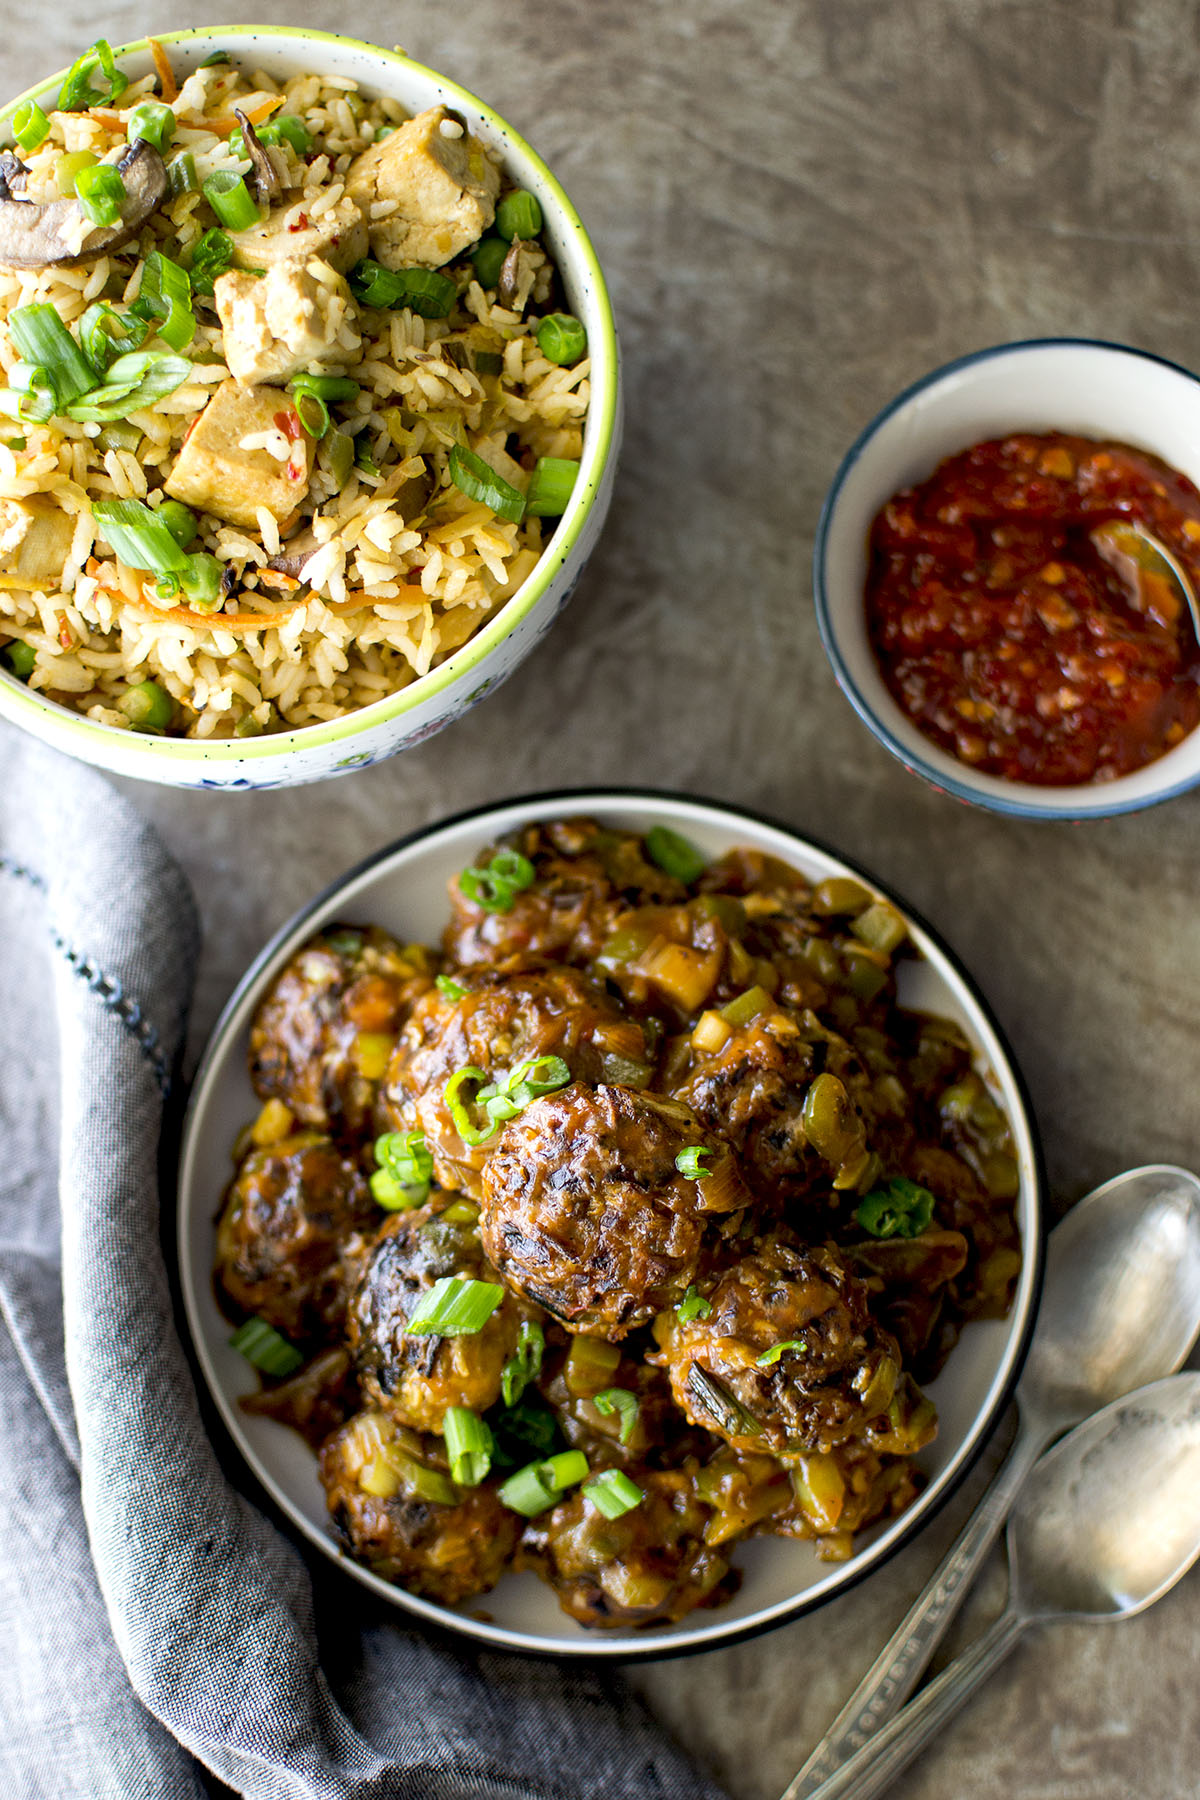 Bowl with Indo-Chinese saucy vegetable fritters with fried rice and chili sauce in the background